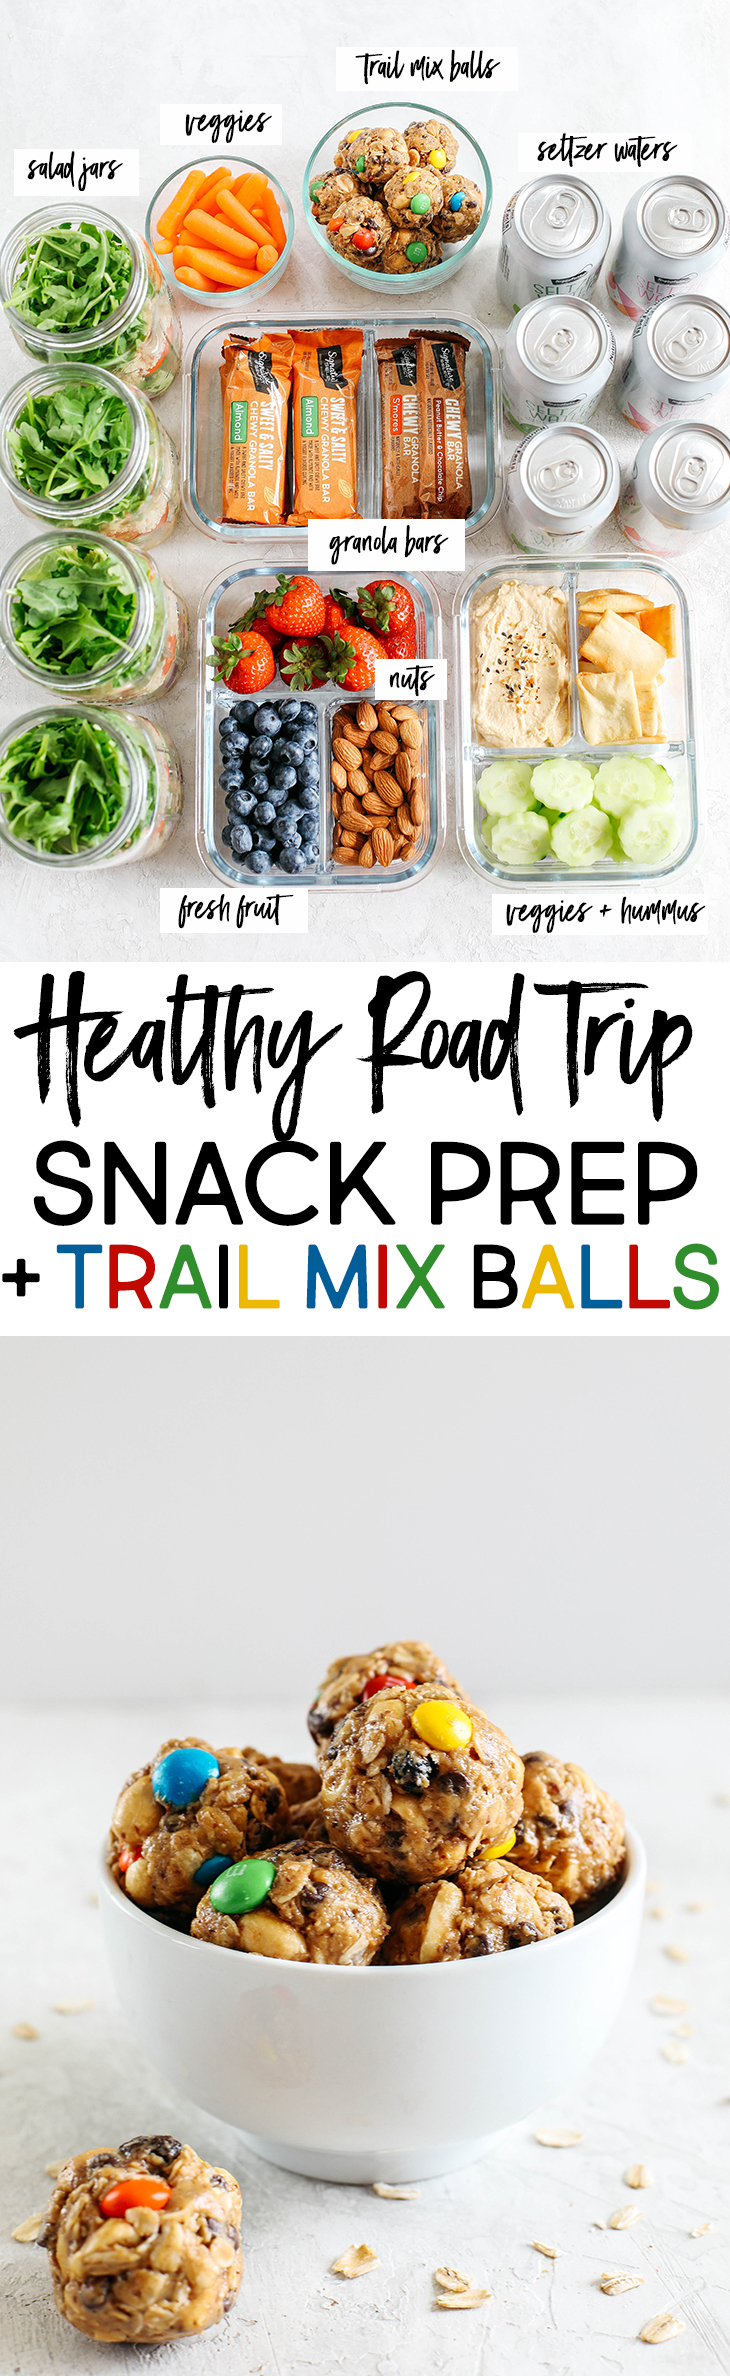 Hit the road this season with delicious healthy snack prep ideas that you can easily pack for long car rides or picnics along with my favorite recipe for NO BAKE trail mix energy balls!